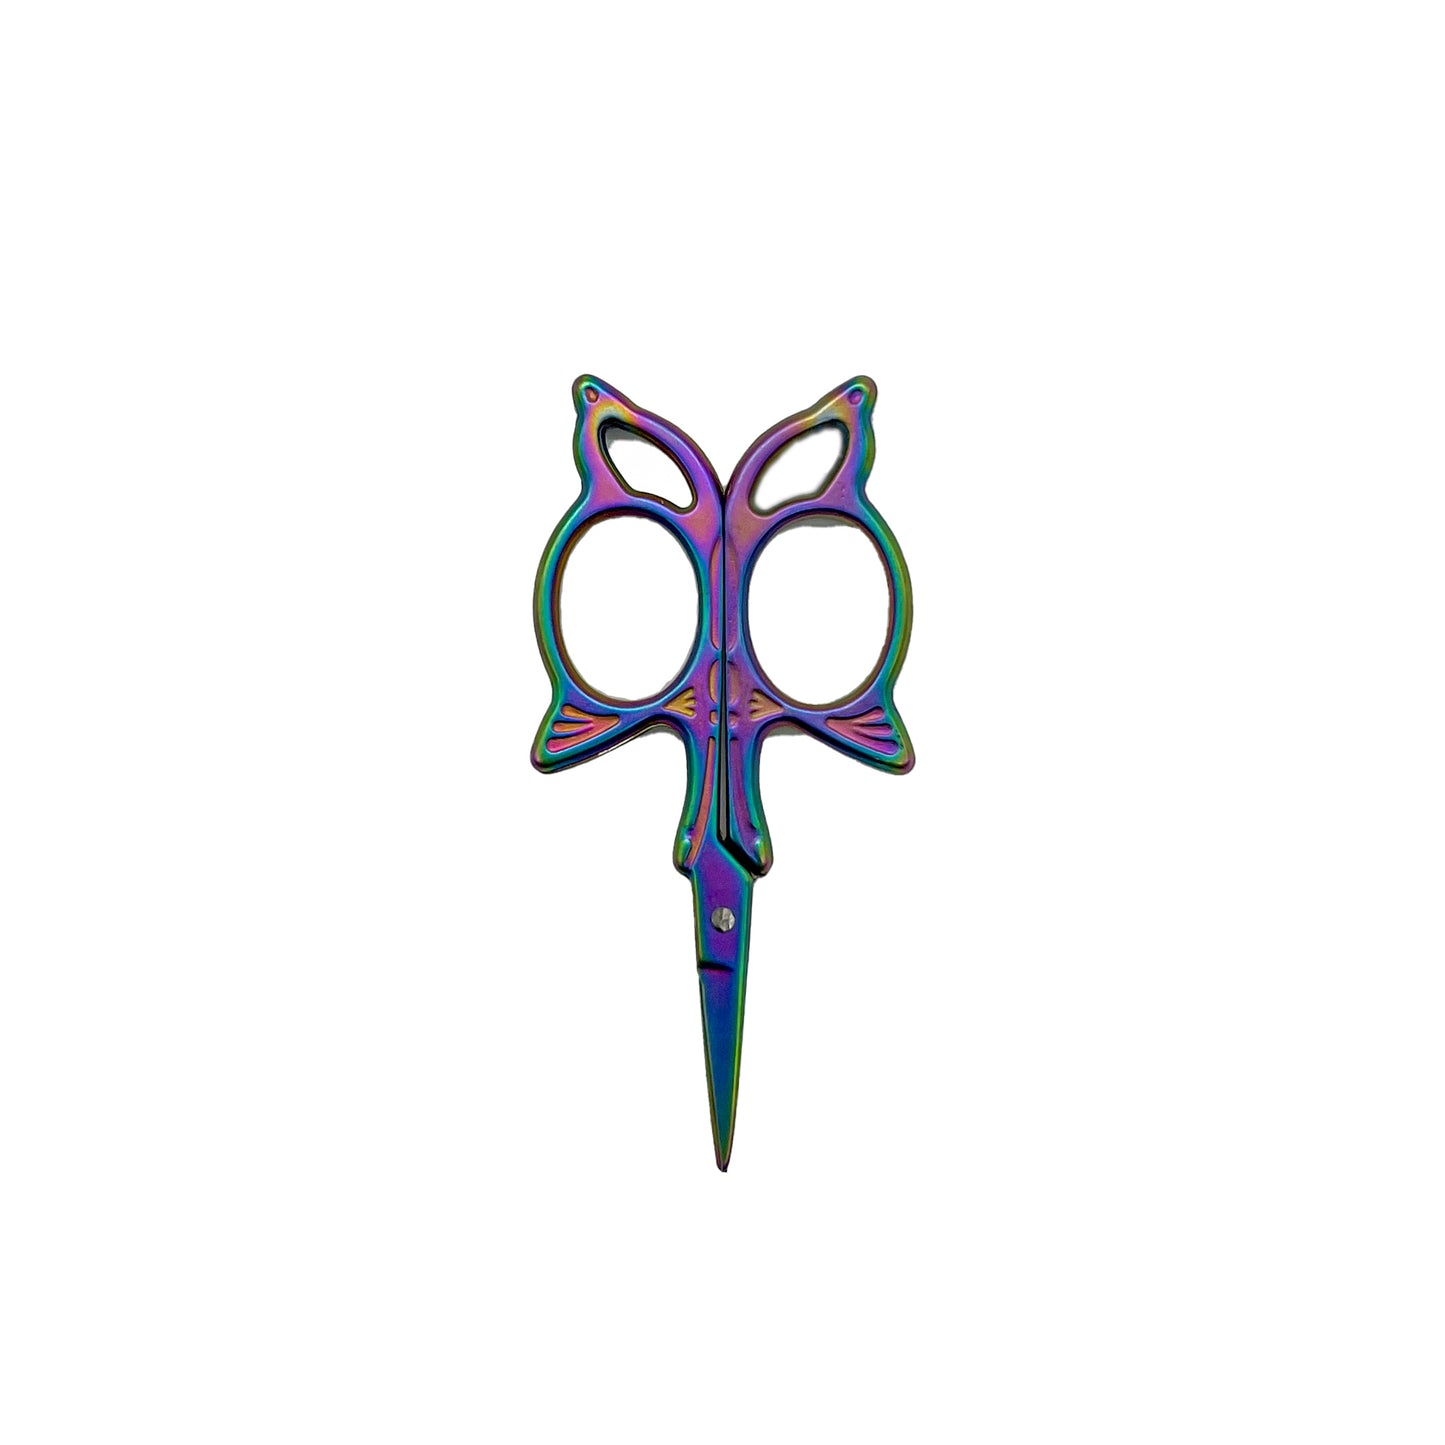 A pair of rainbow butterfly crafting scissors on a white background.